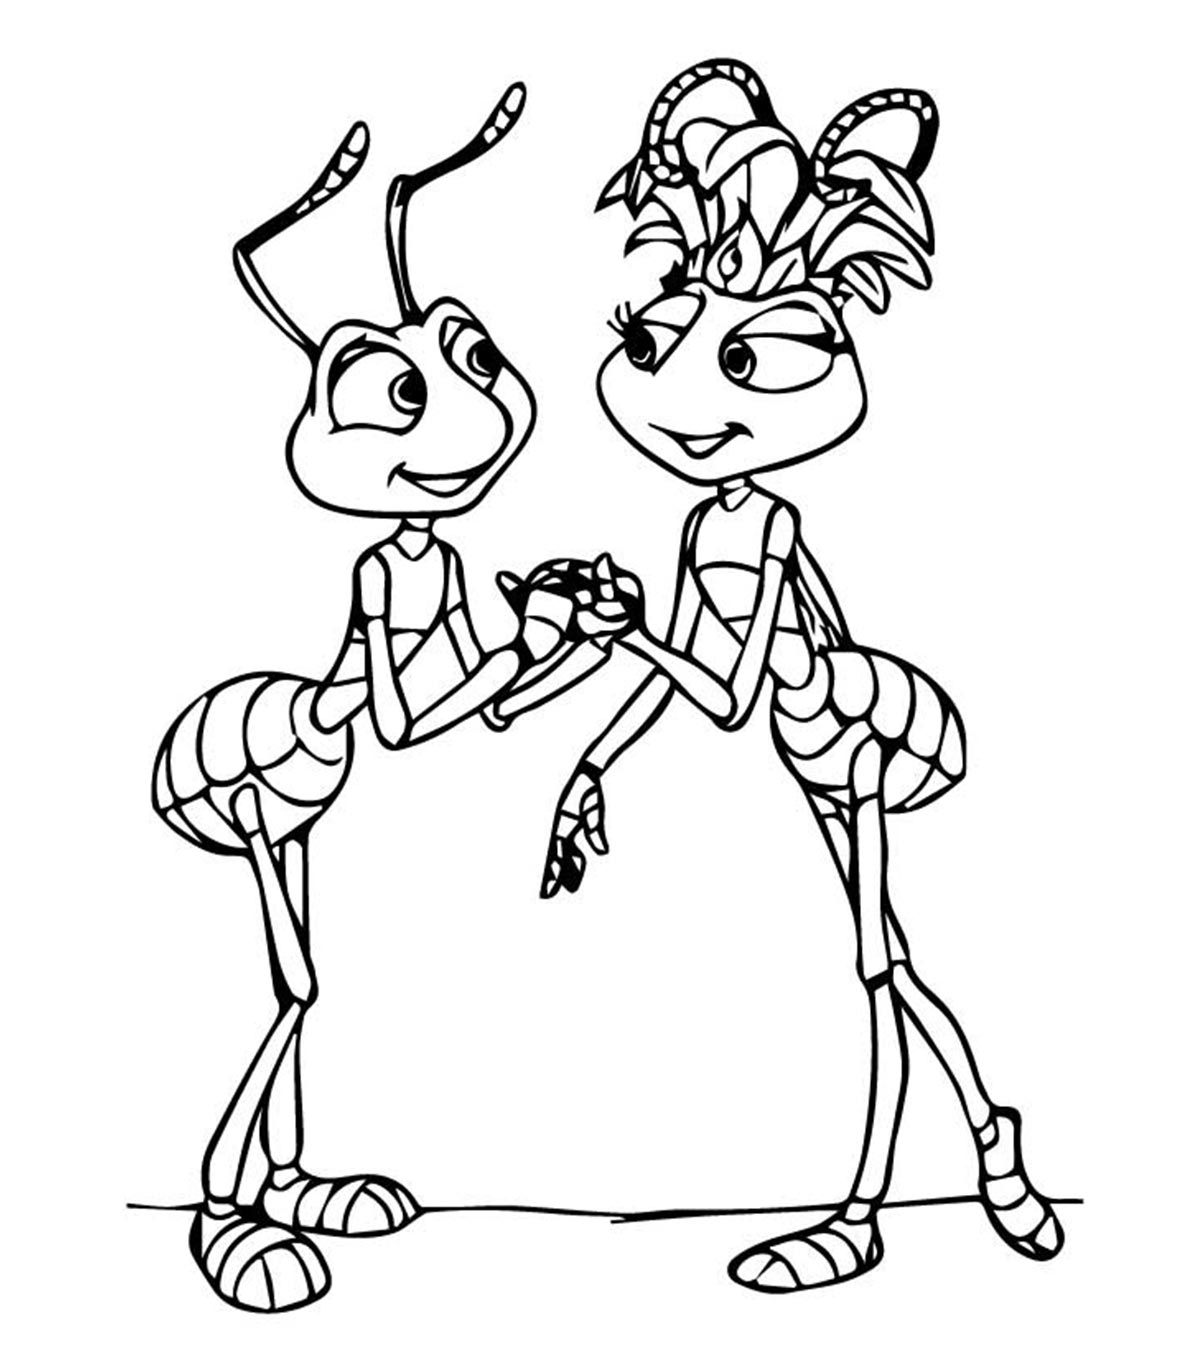 25 Theme Based Ants Coloring Pages Your Toddler Will Love_image